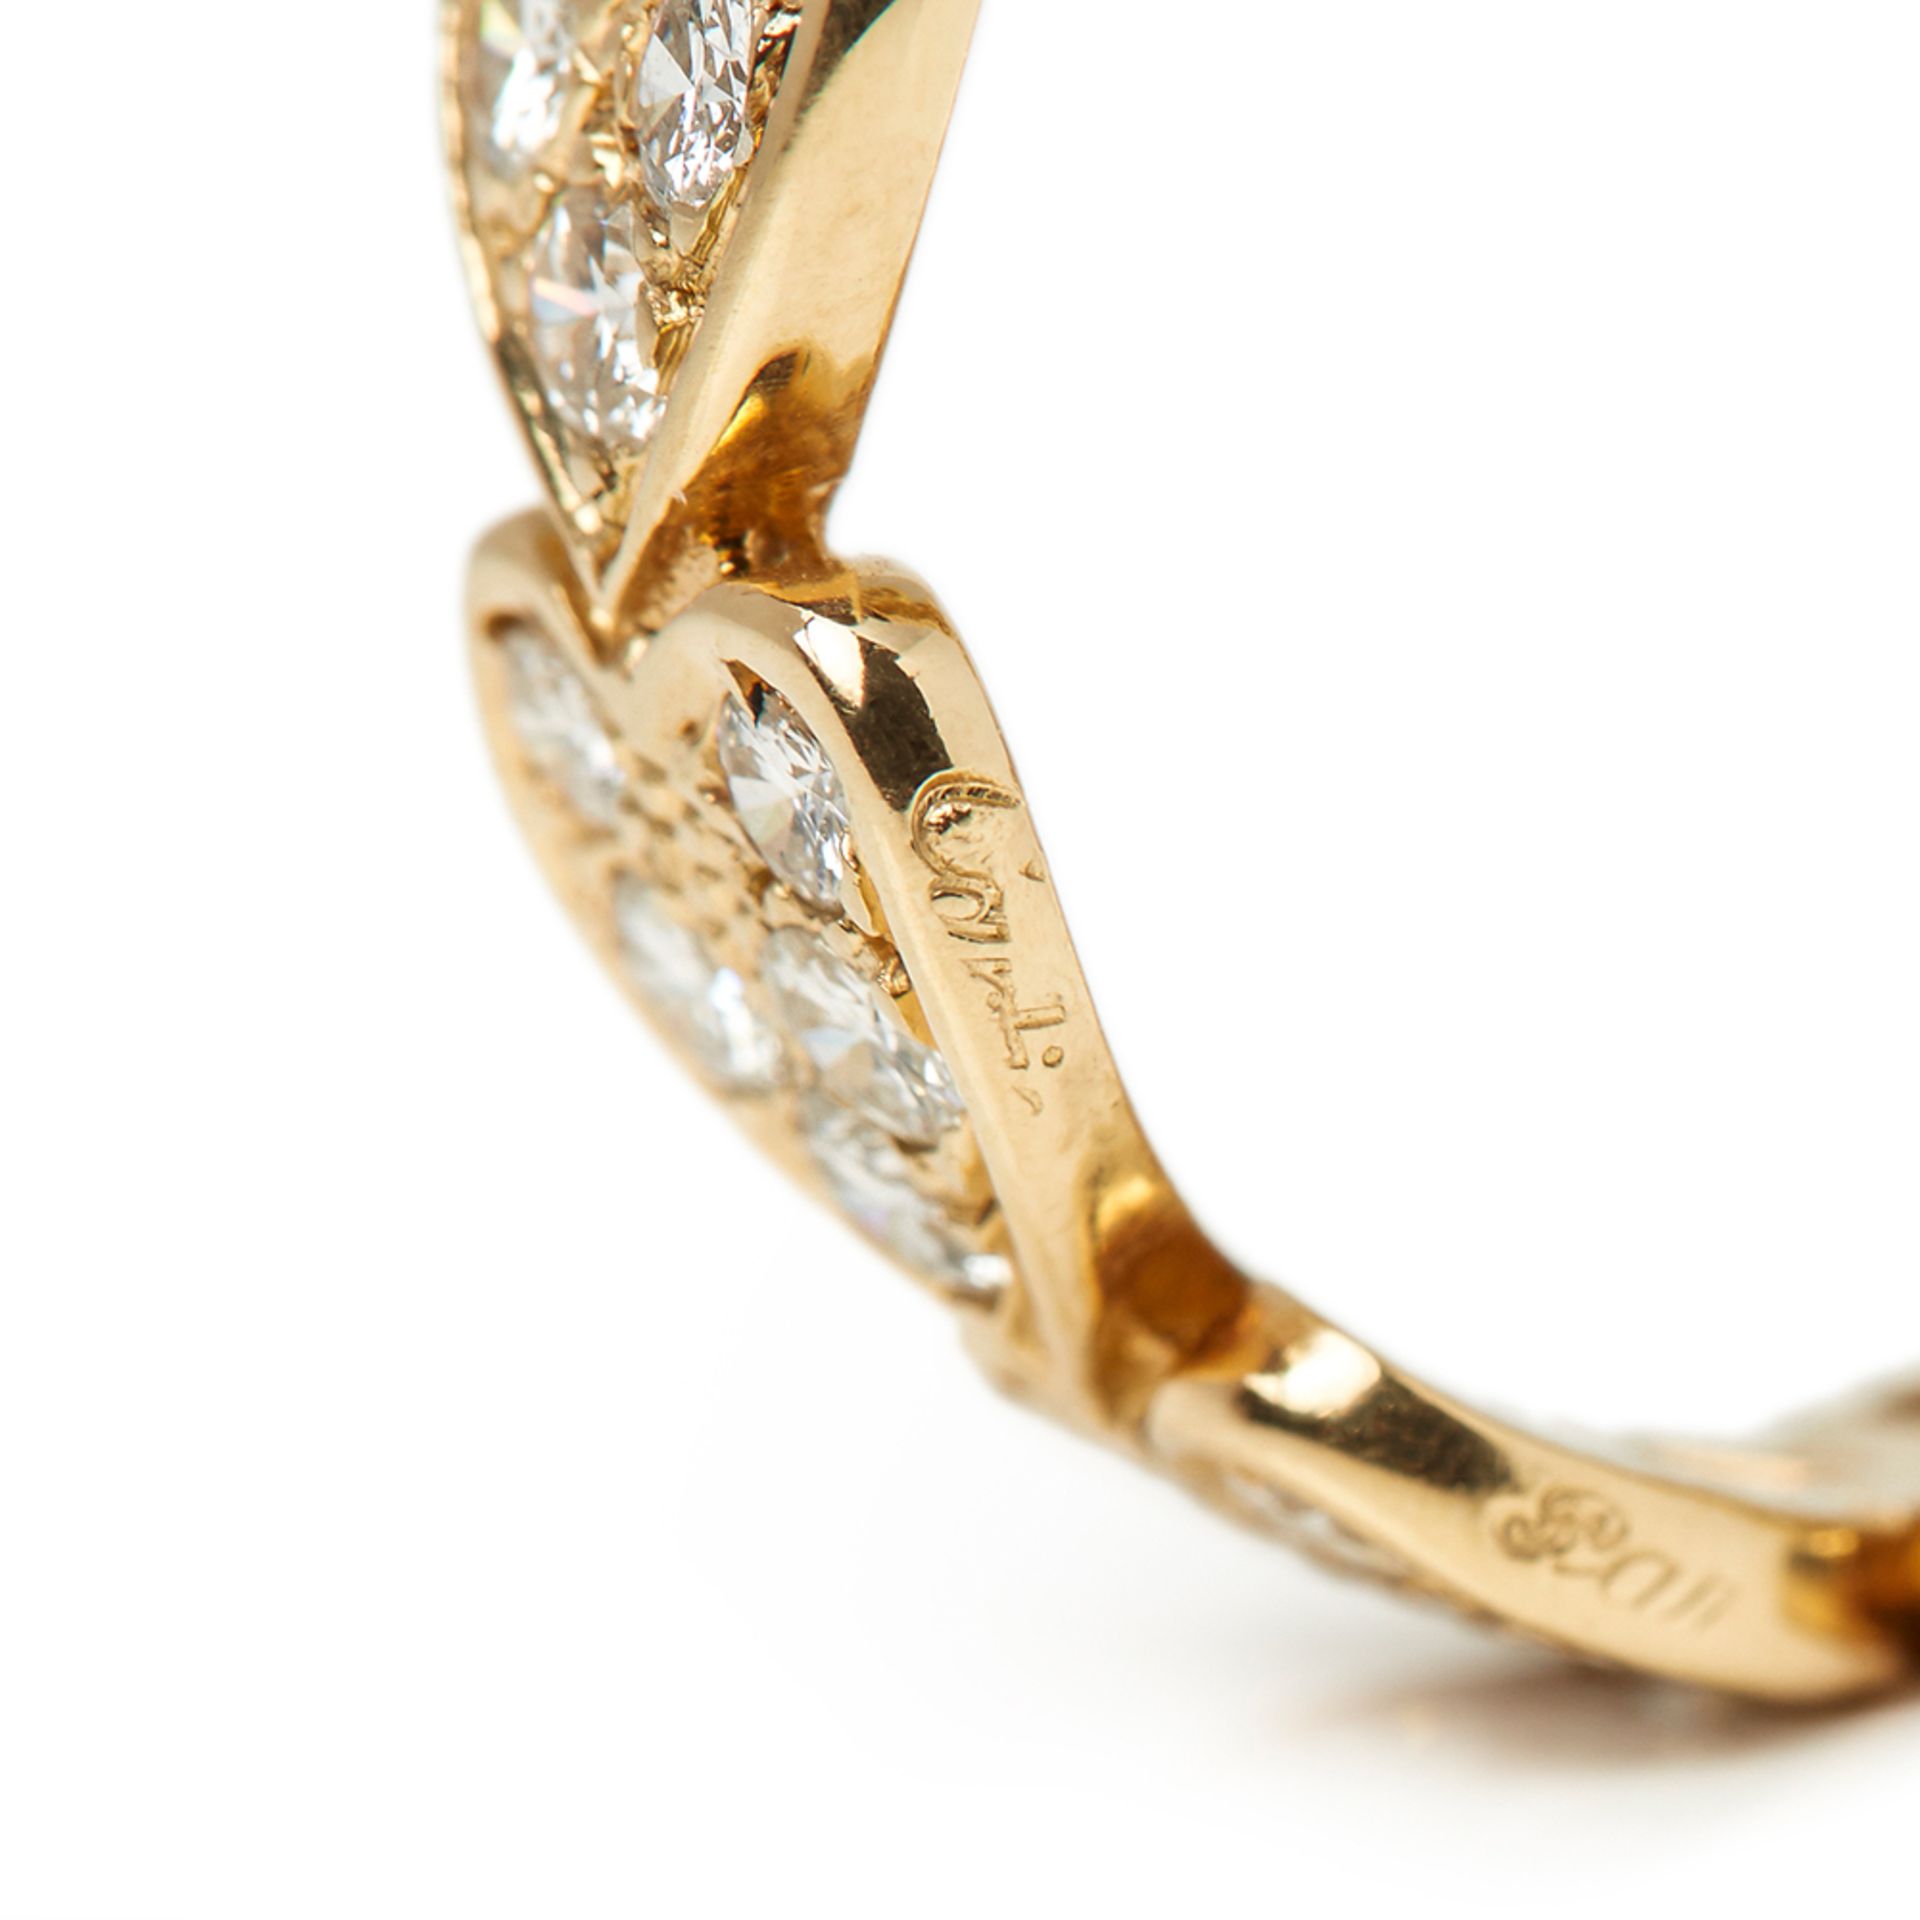 Cartier 18k Yellow Gold Diamond Heart Ring - Image 7 of 9